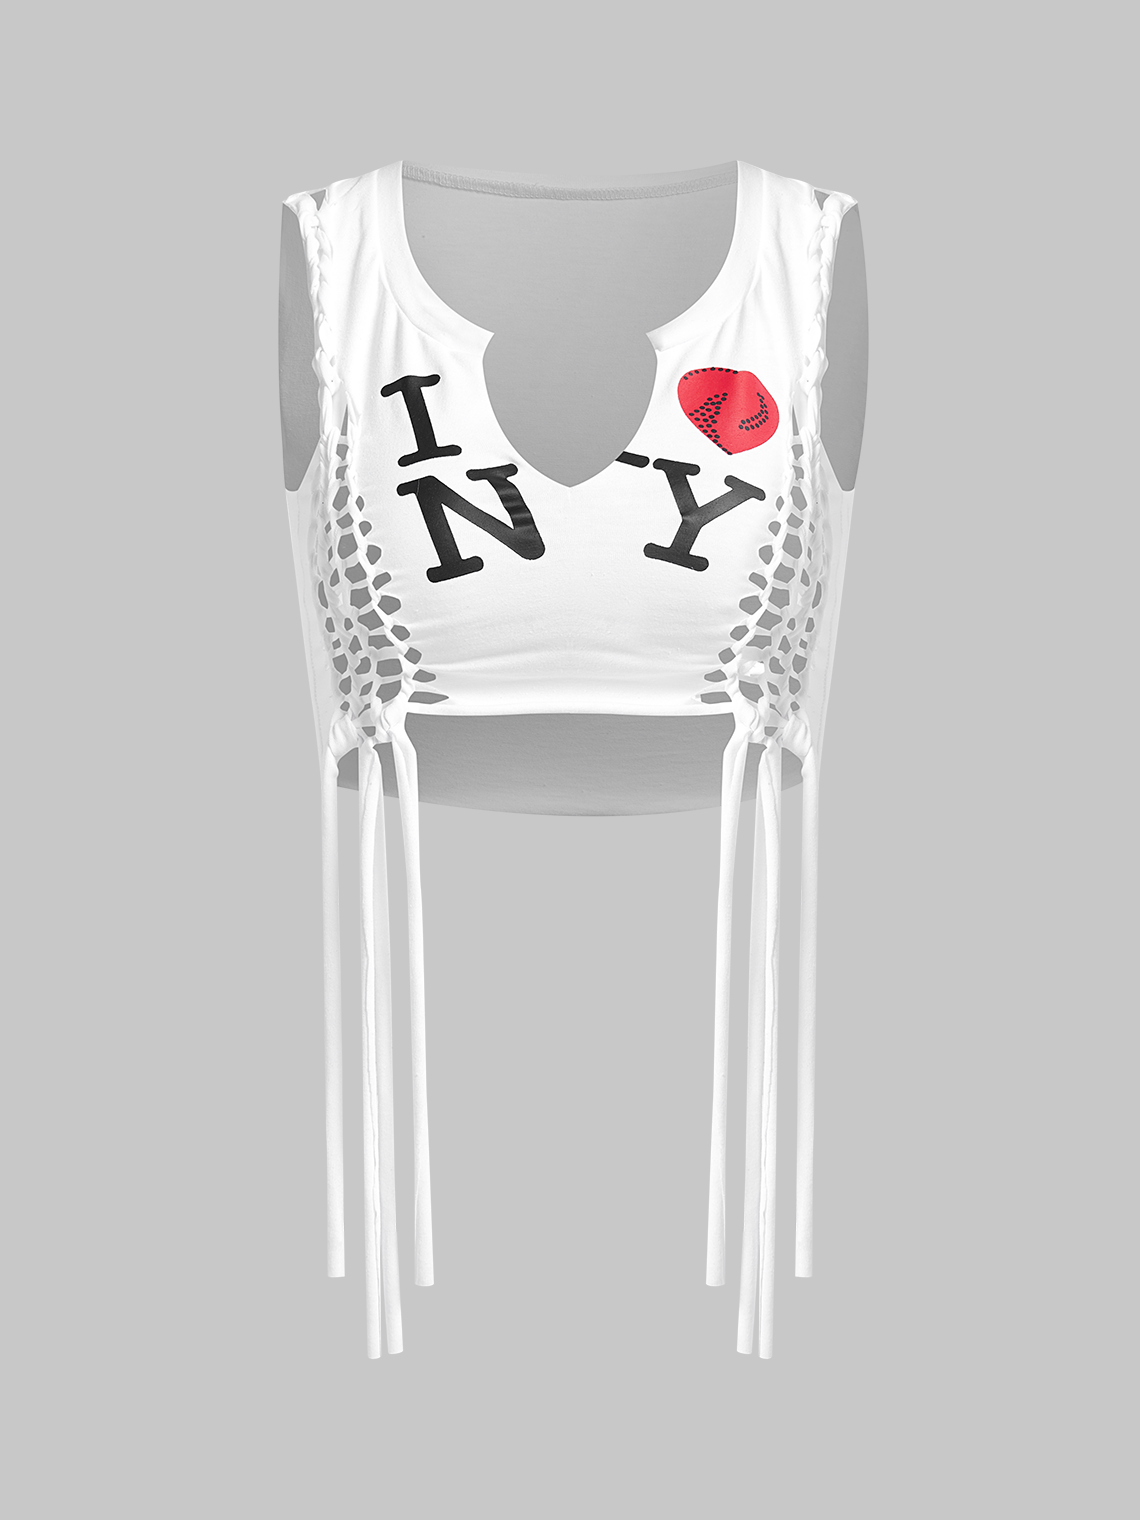 Cut Out Notched Text Letters Tank Top